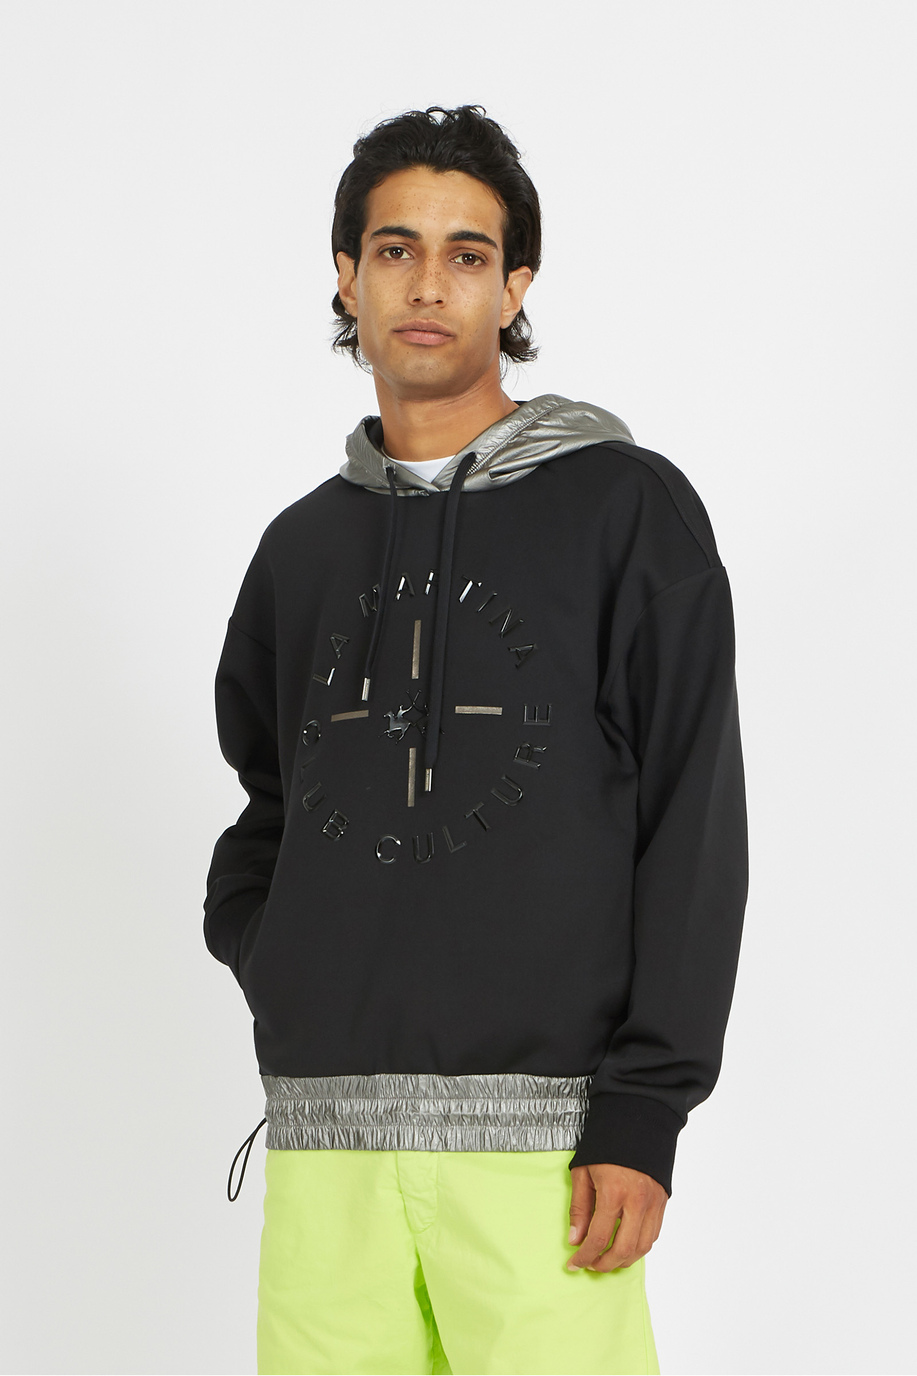 Long-sleeves man fleece with hoodie cotton-mixed over fit  -  Vonnie - Sweatshirts | La Martina - Official Online Shop